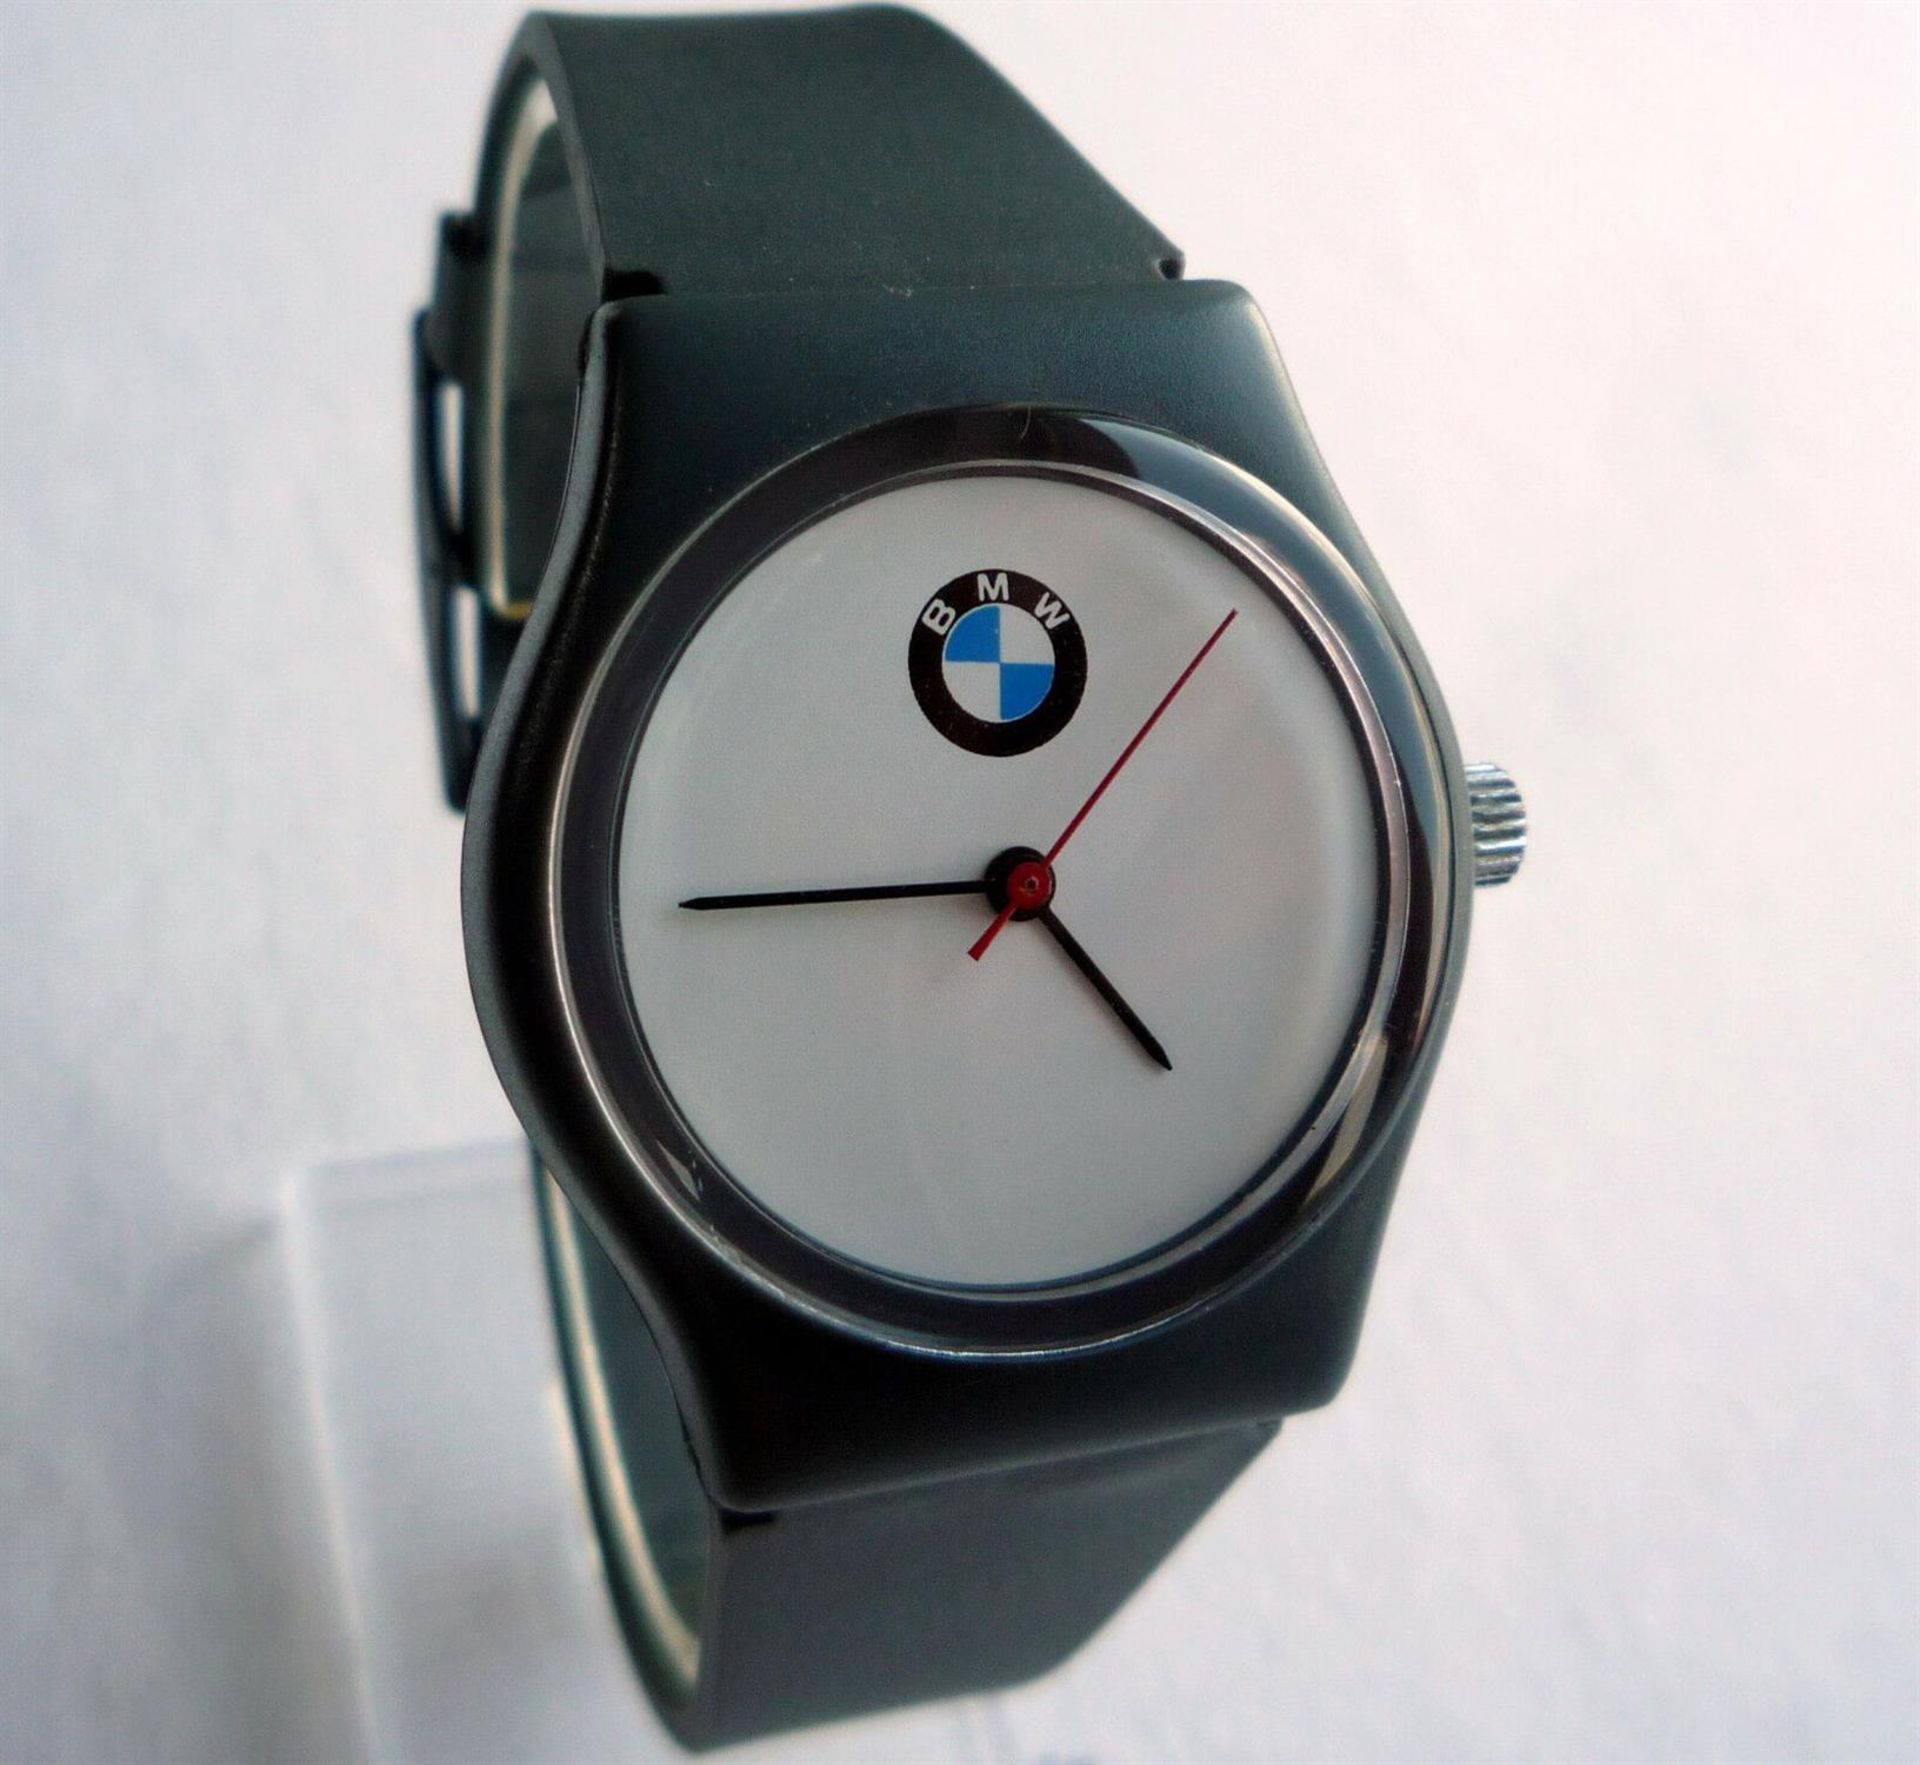 BMW retro-design Silicone Band Watch - Image 5 of 5